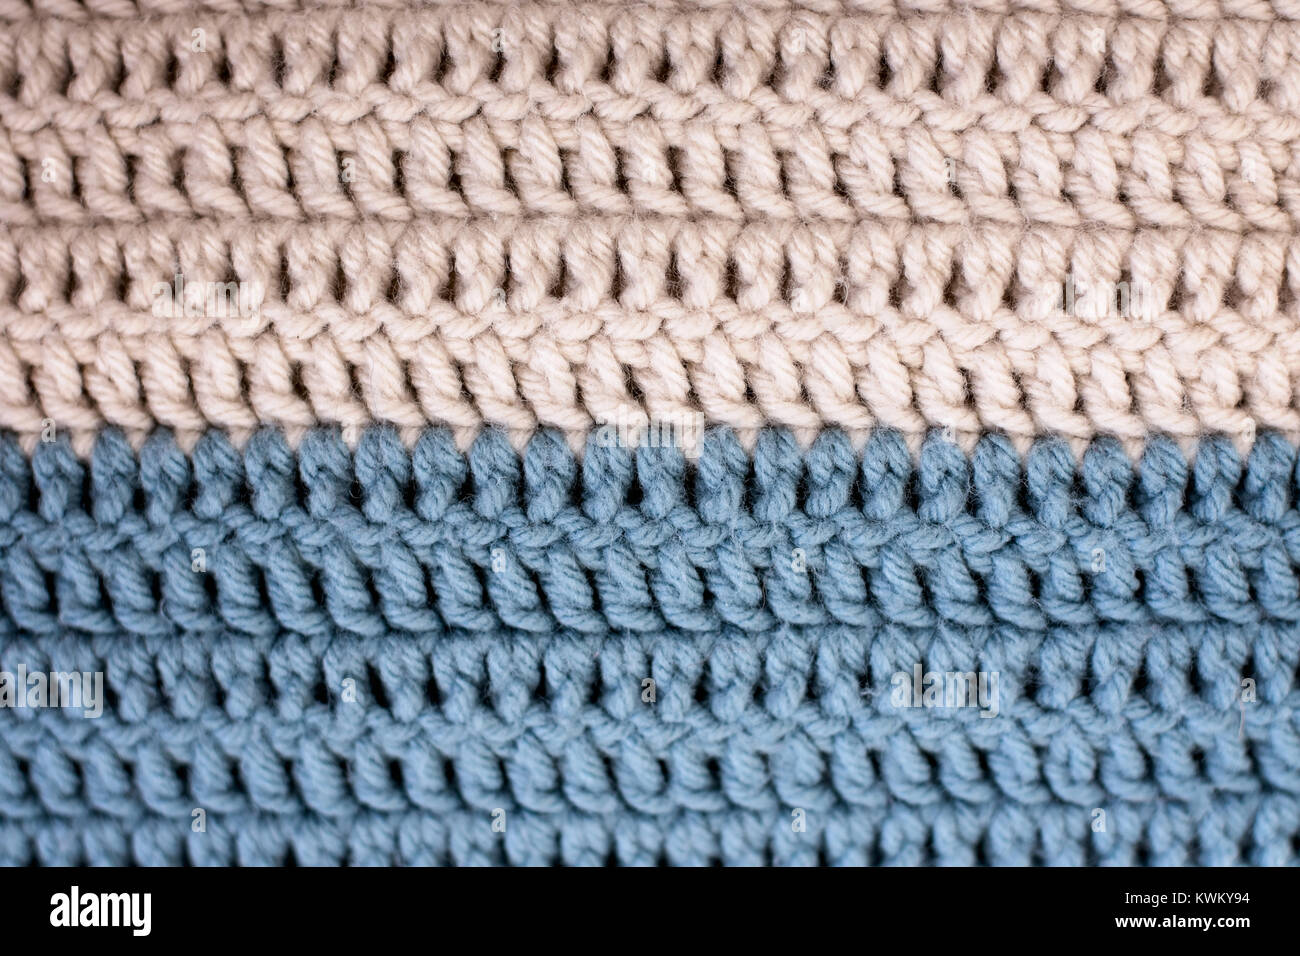 Close-up of crocheted afghan in cream and blue Stock Photo